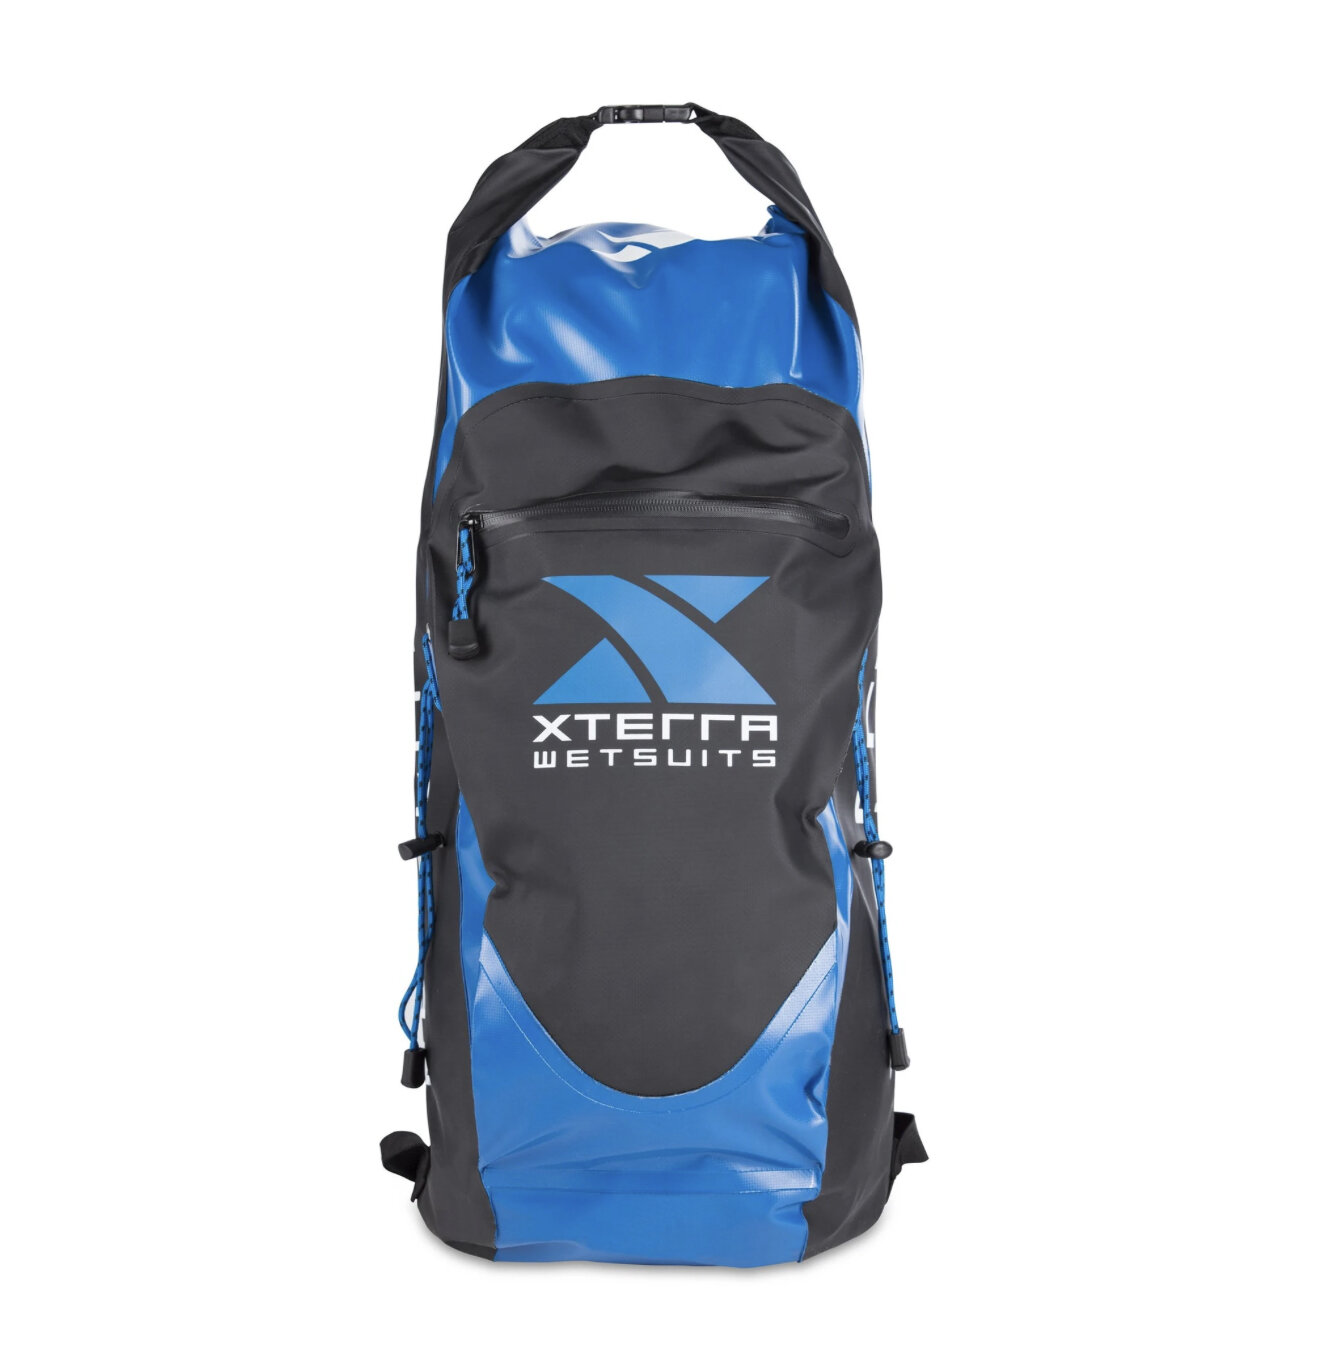 WETSUITS BACKPACK DRYBAG SPECIAL